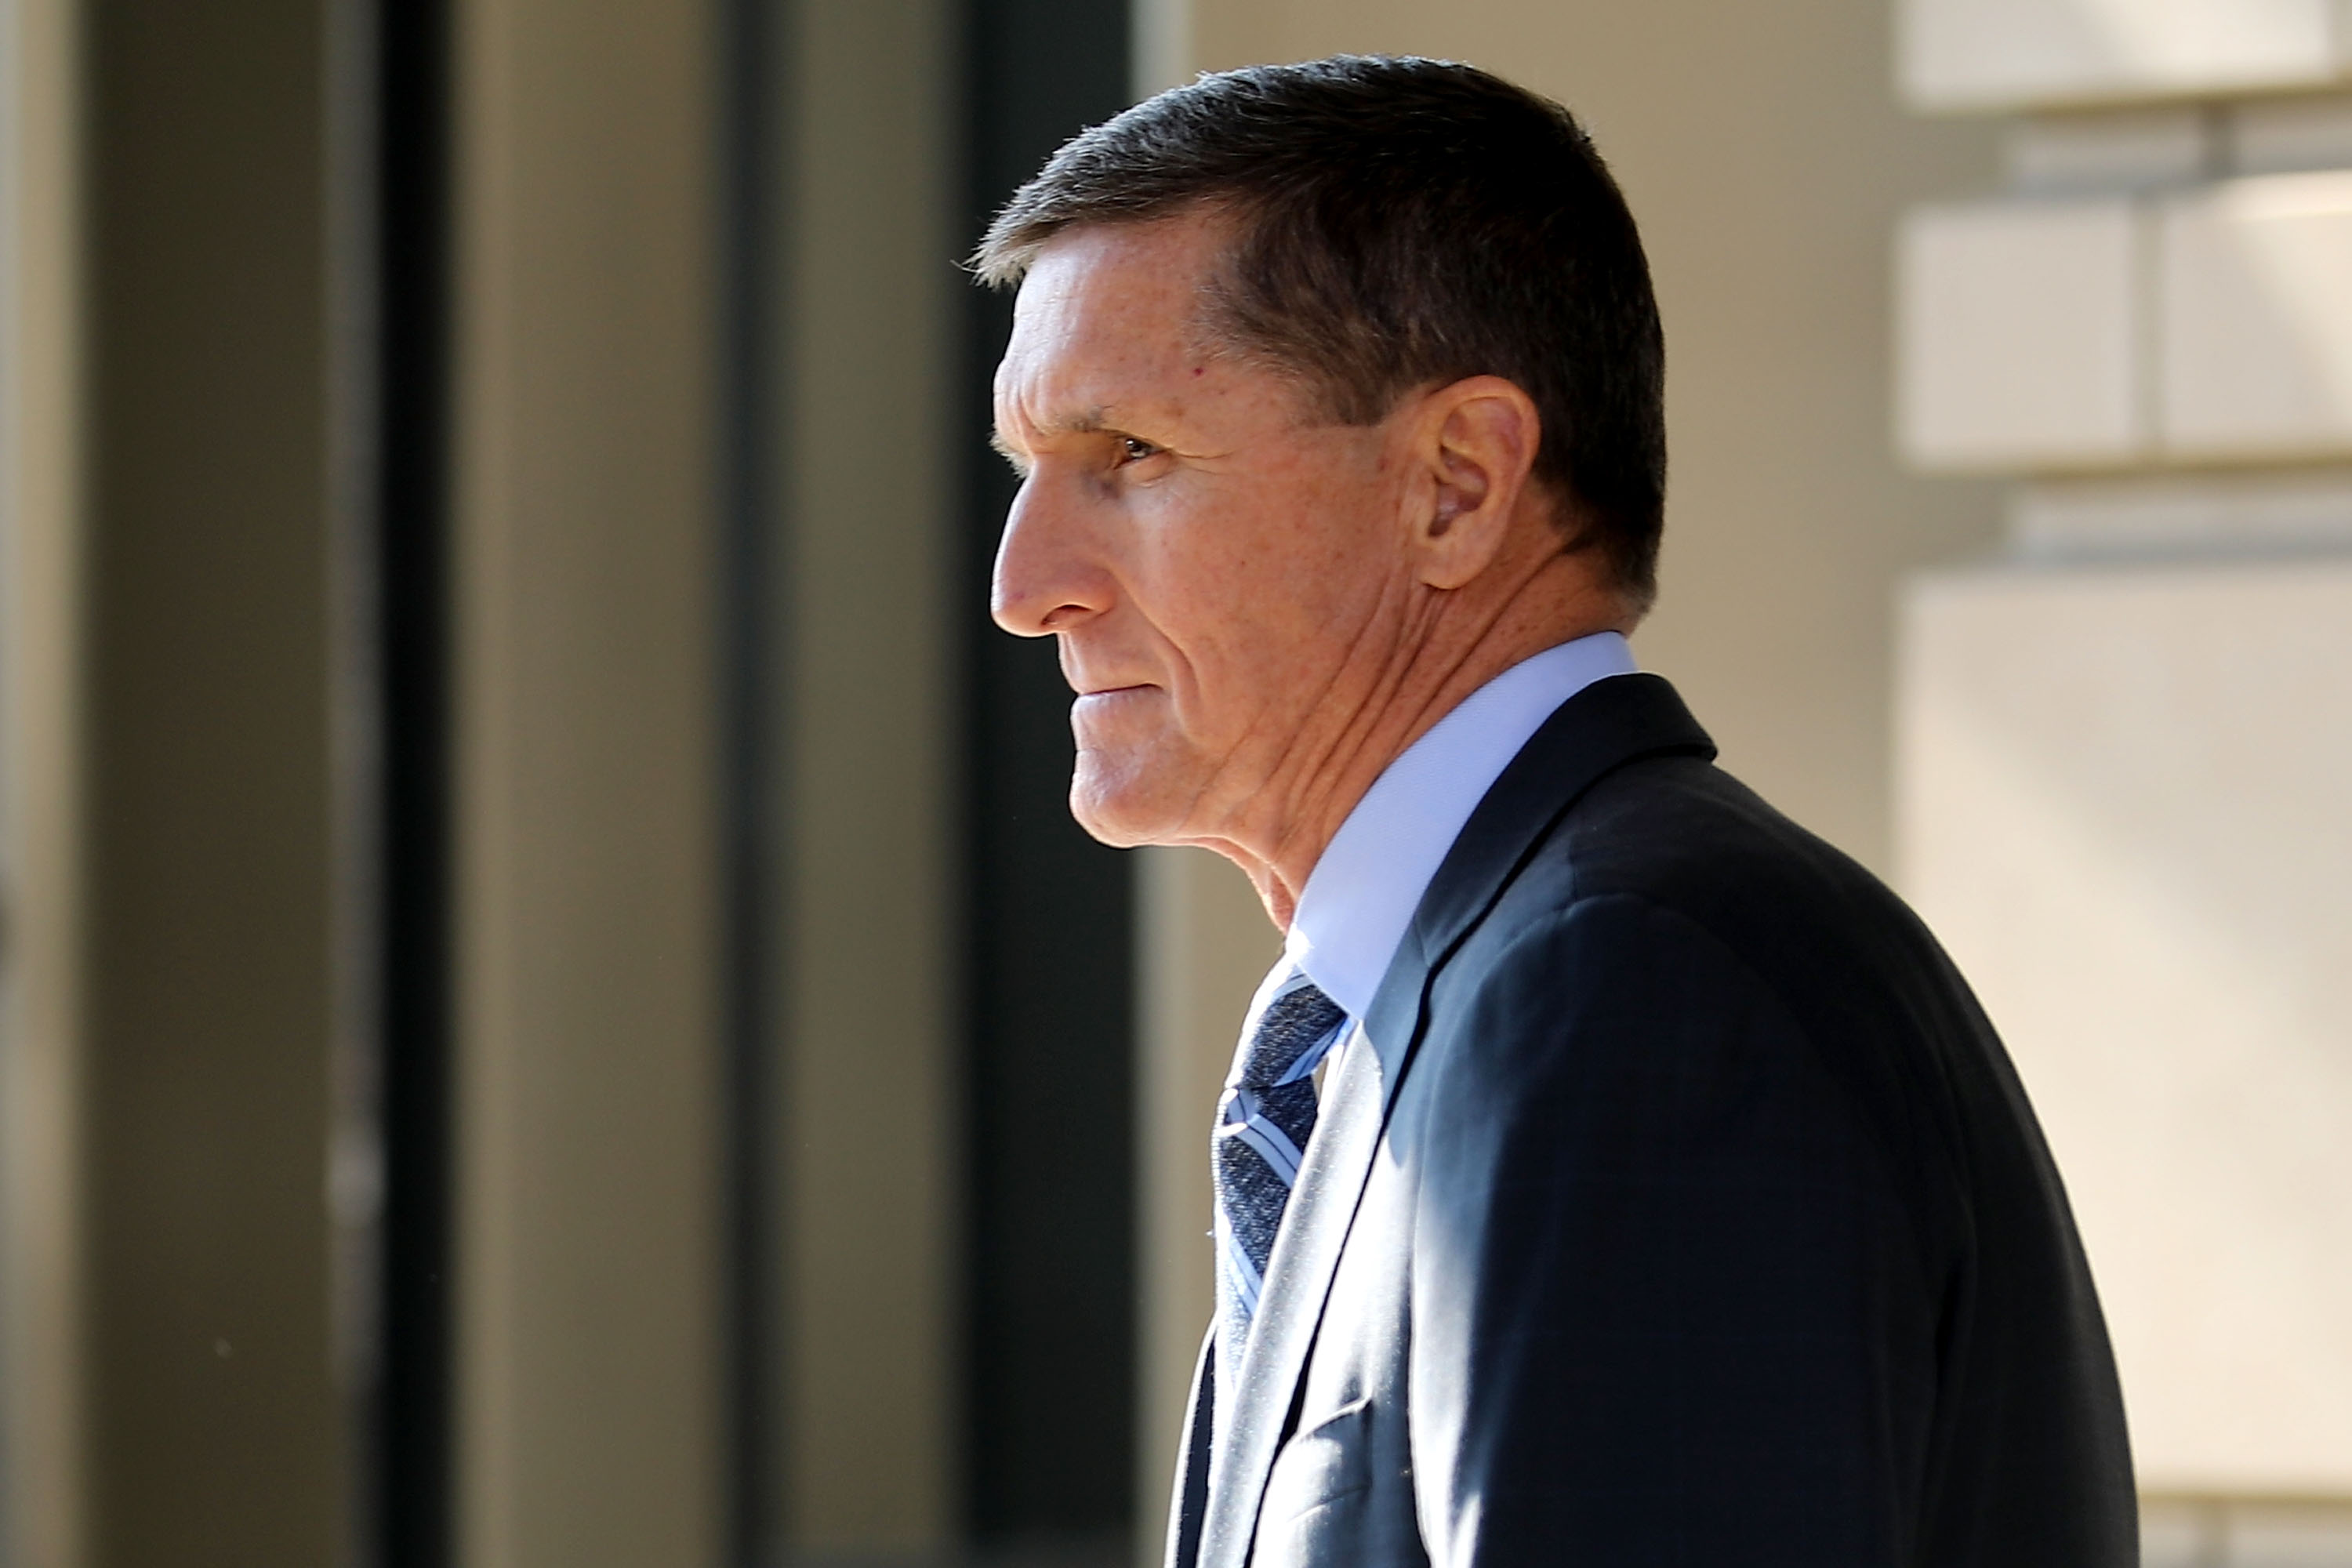 Former National Security Advisor Michael Flynn leaves following his plea hearing at the Prettyman Federal Courthouse December 1, 2017 in Washington, DC. (Chip Somodevilla&mdash;Getty Images)